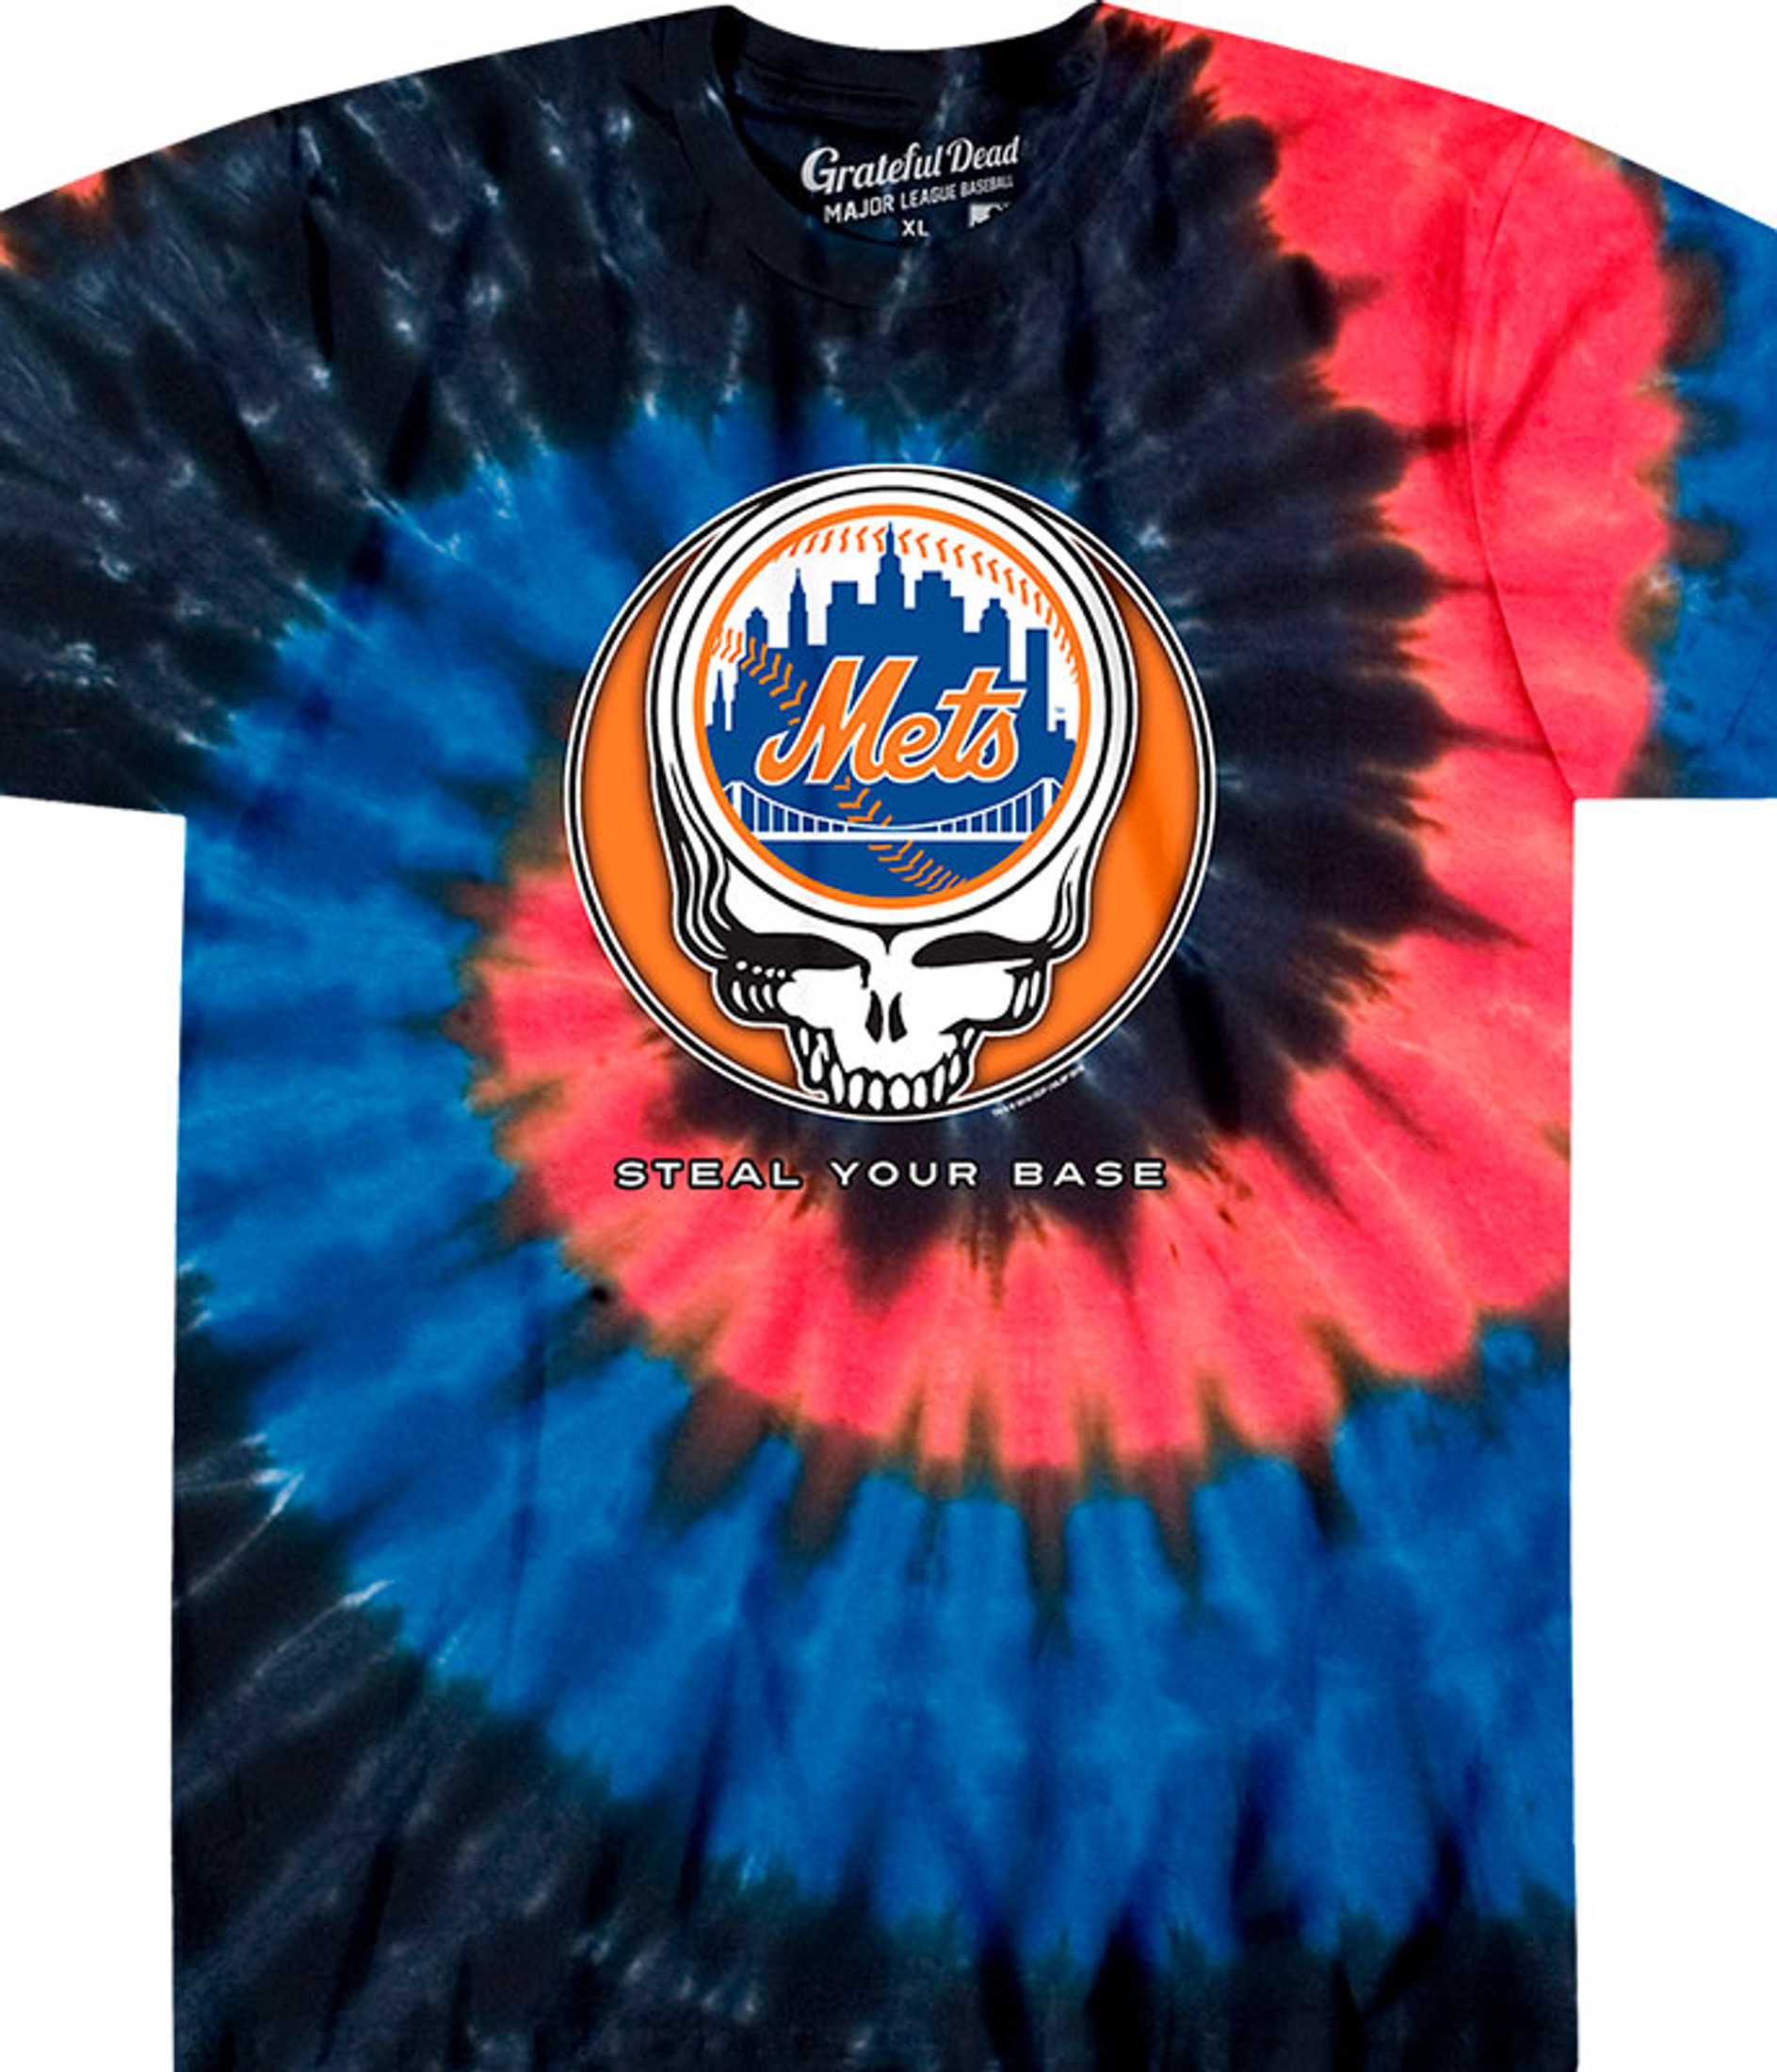 Grateful Dead New York Mets Steal Your Base Tie-Dye T-Shirt